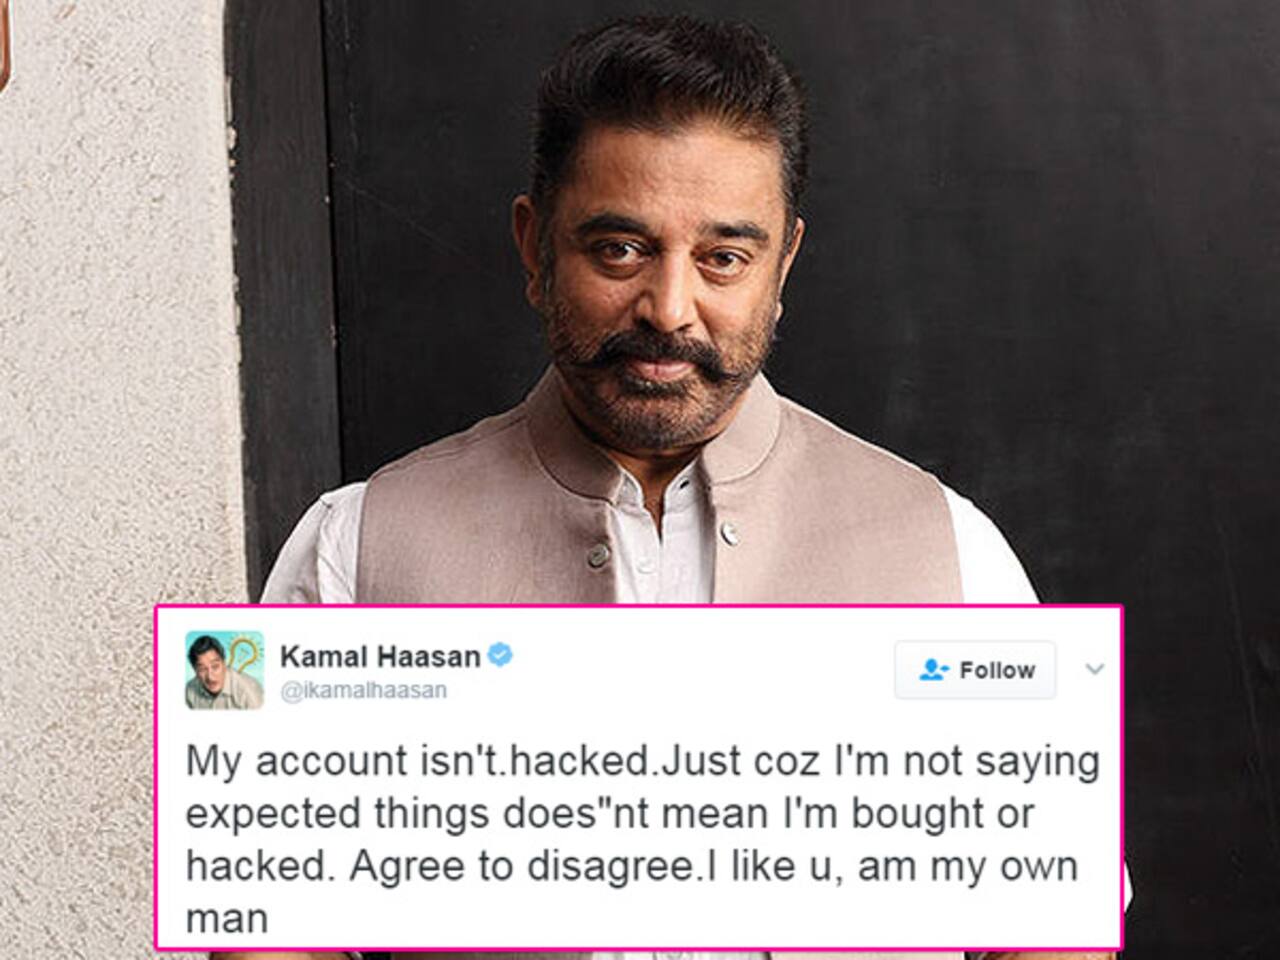 Kamal Haasan's tweets about Tamil Nadu elections are making us scratch our heads in utter confusion